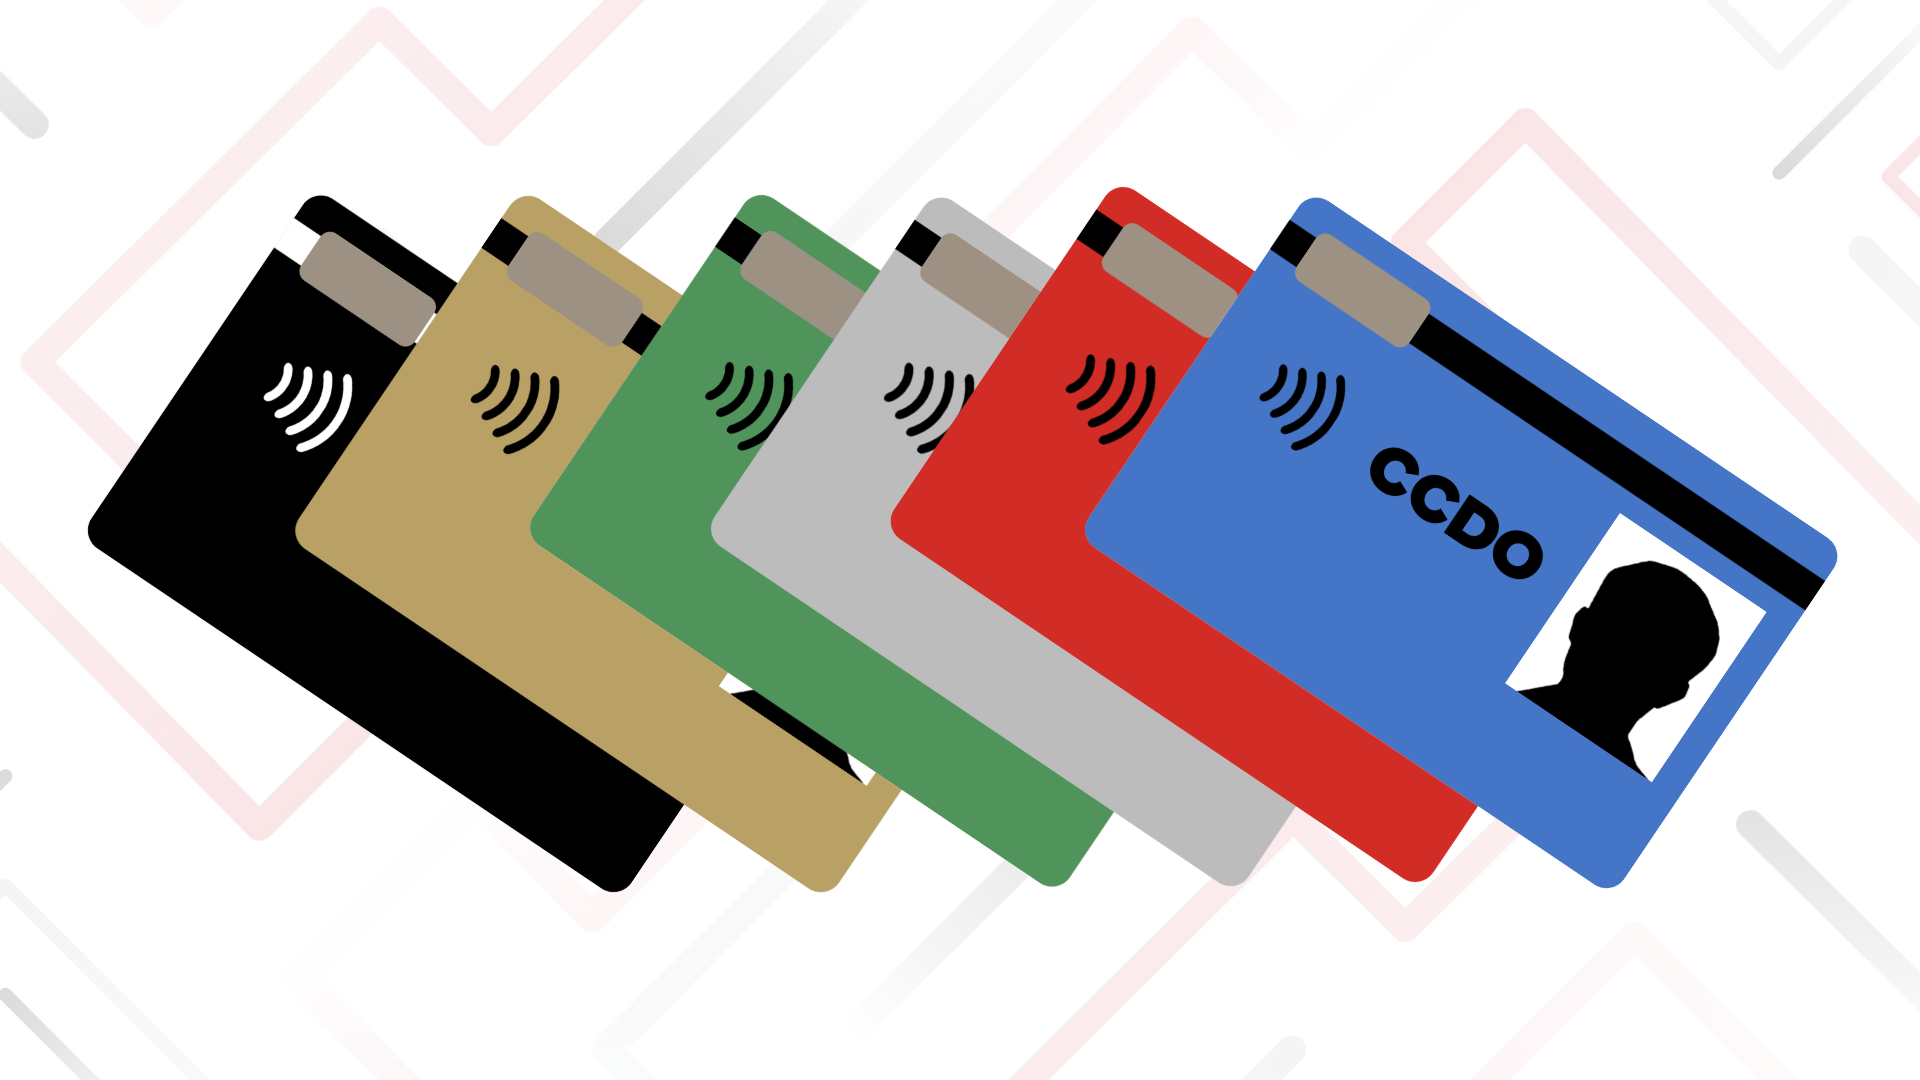 CCDO Cards are Changing